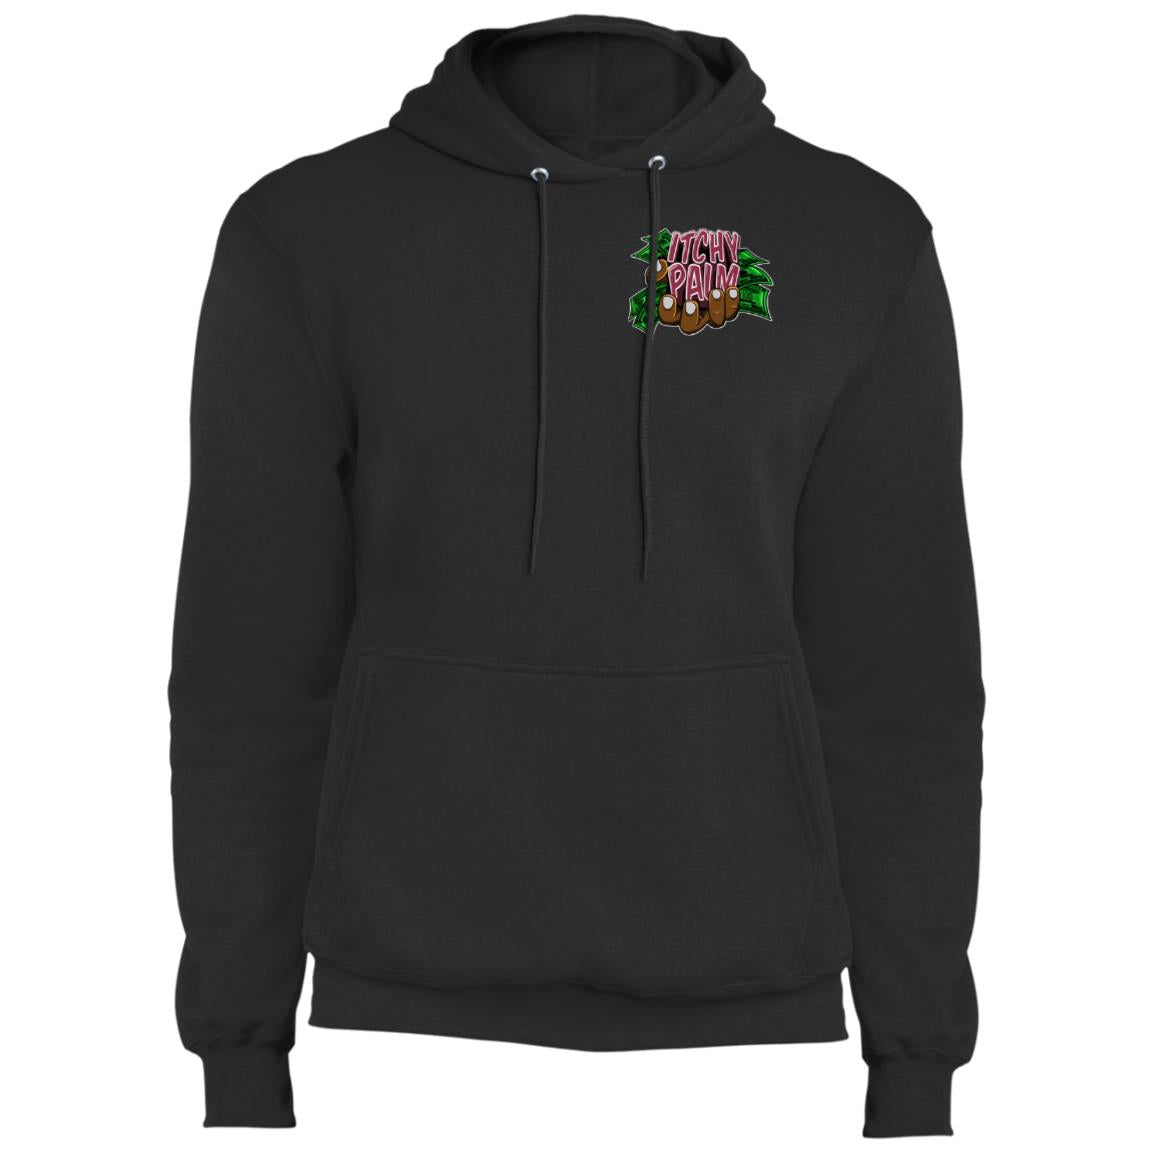 Itchy Palms Fleece Pullover Hoodie